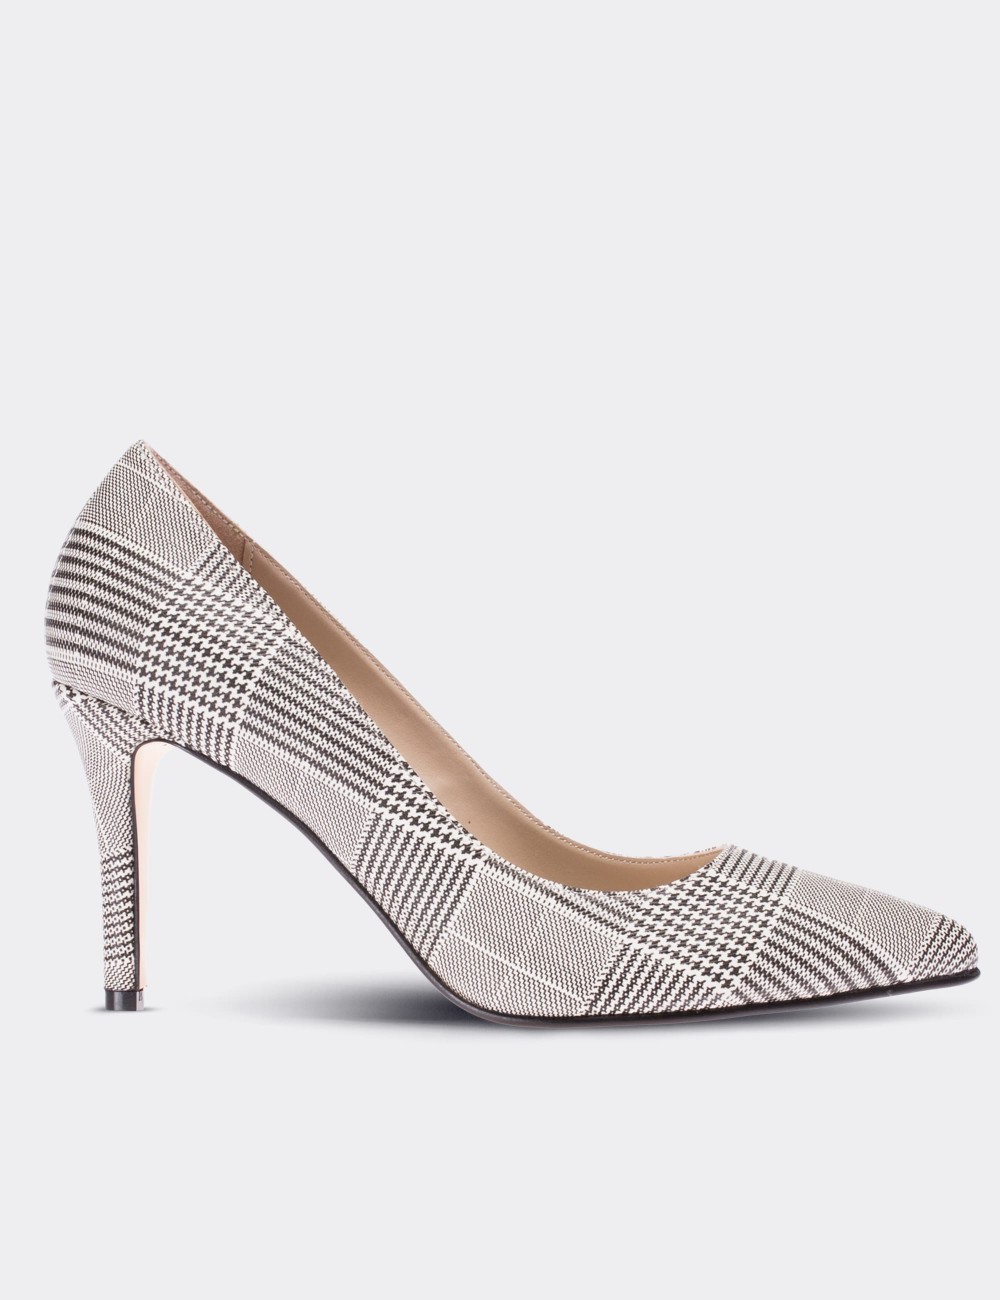 White Leather Pumps - 02029ZBYZM02